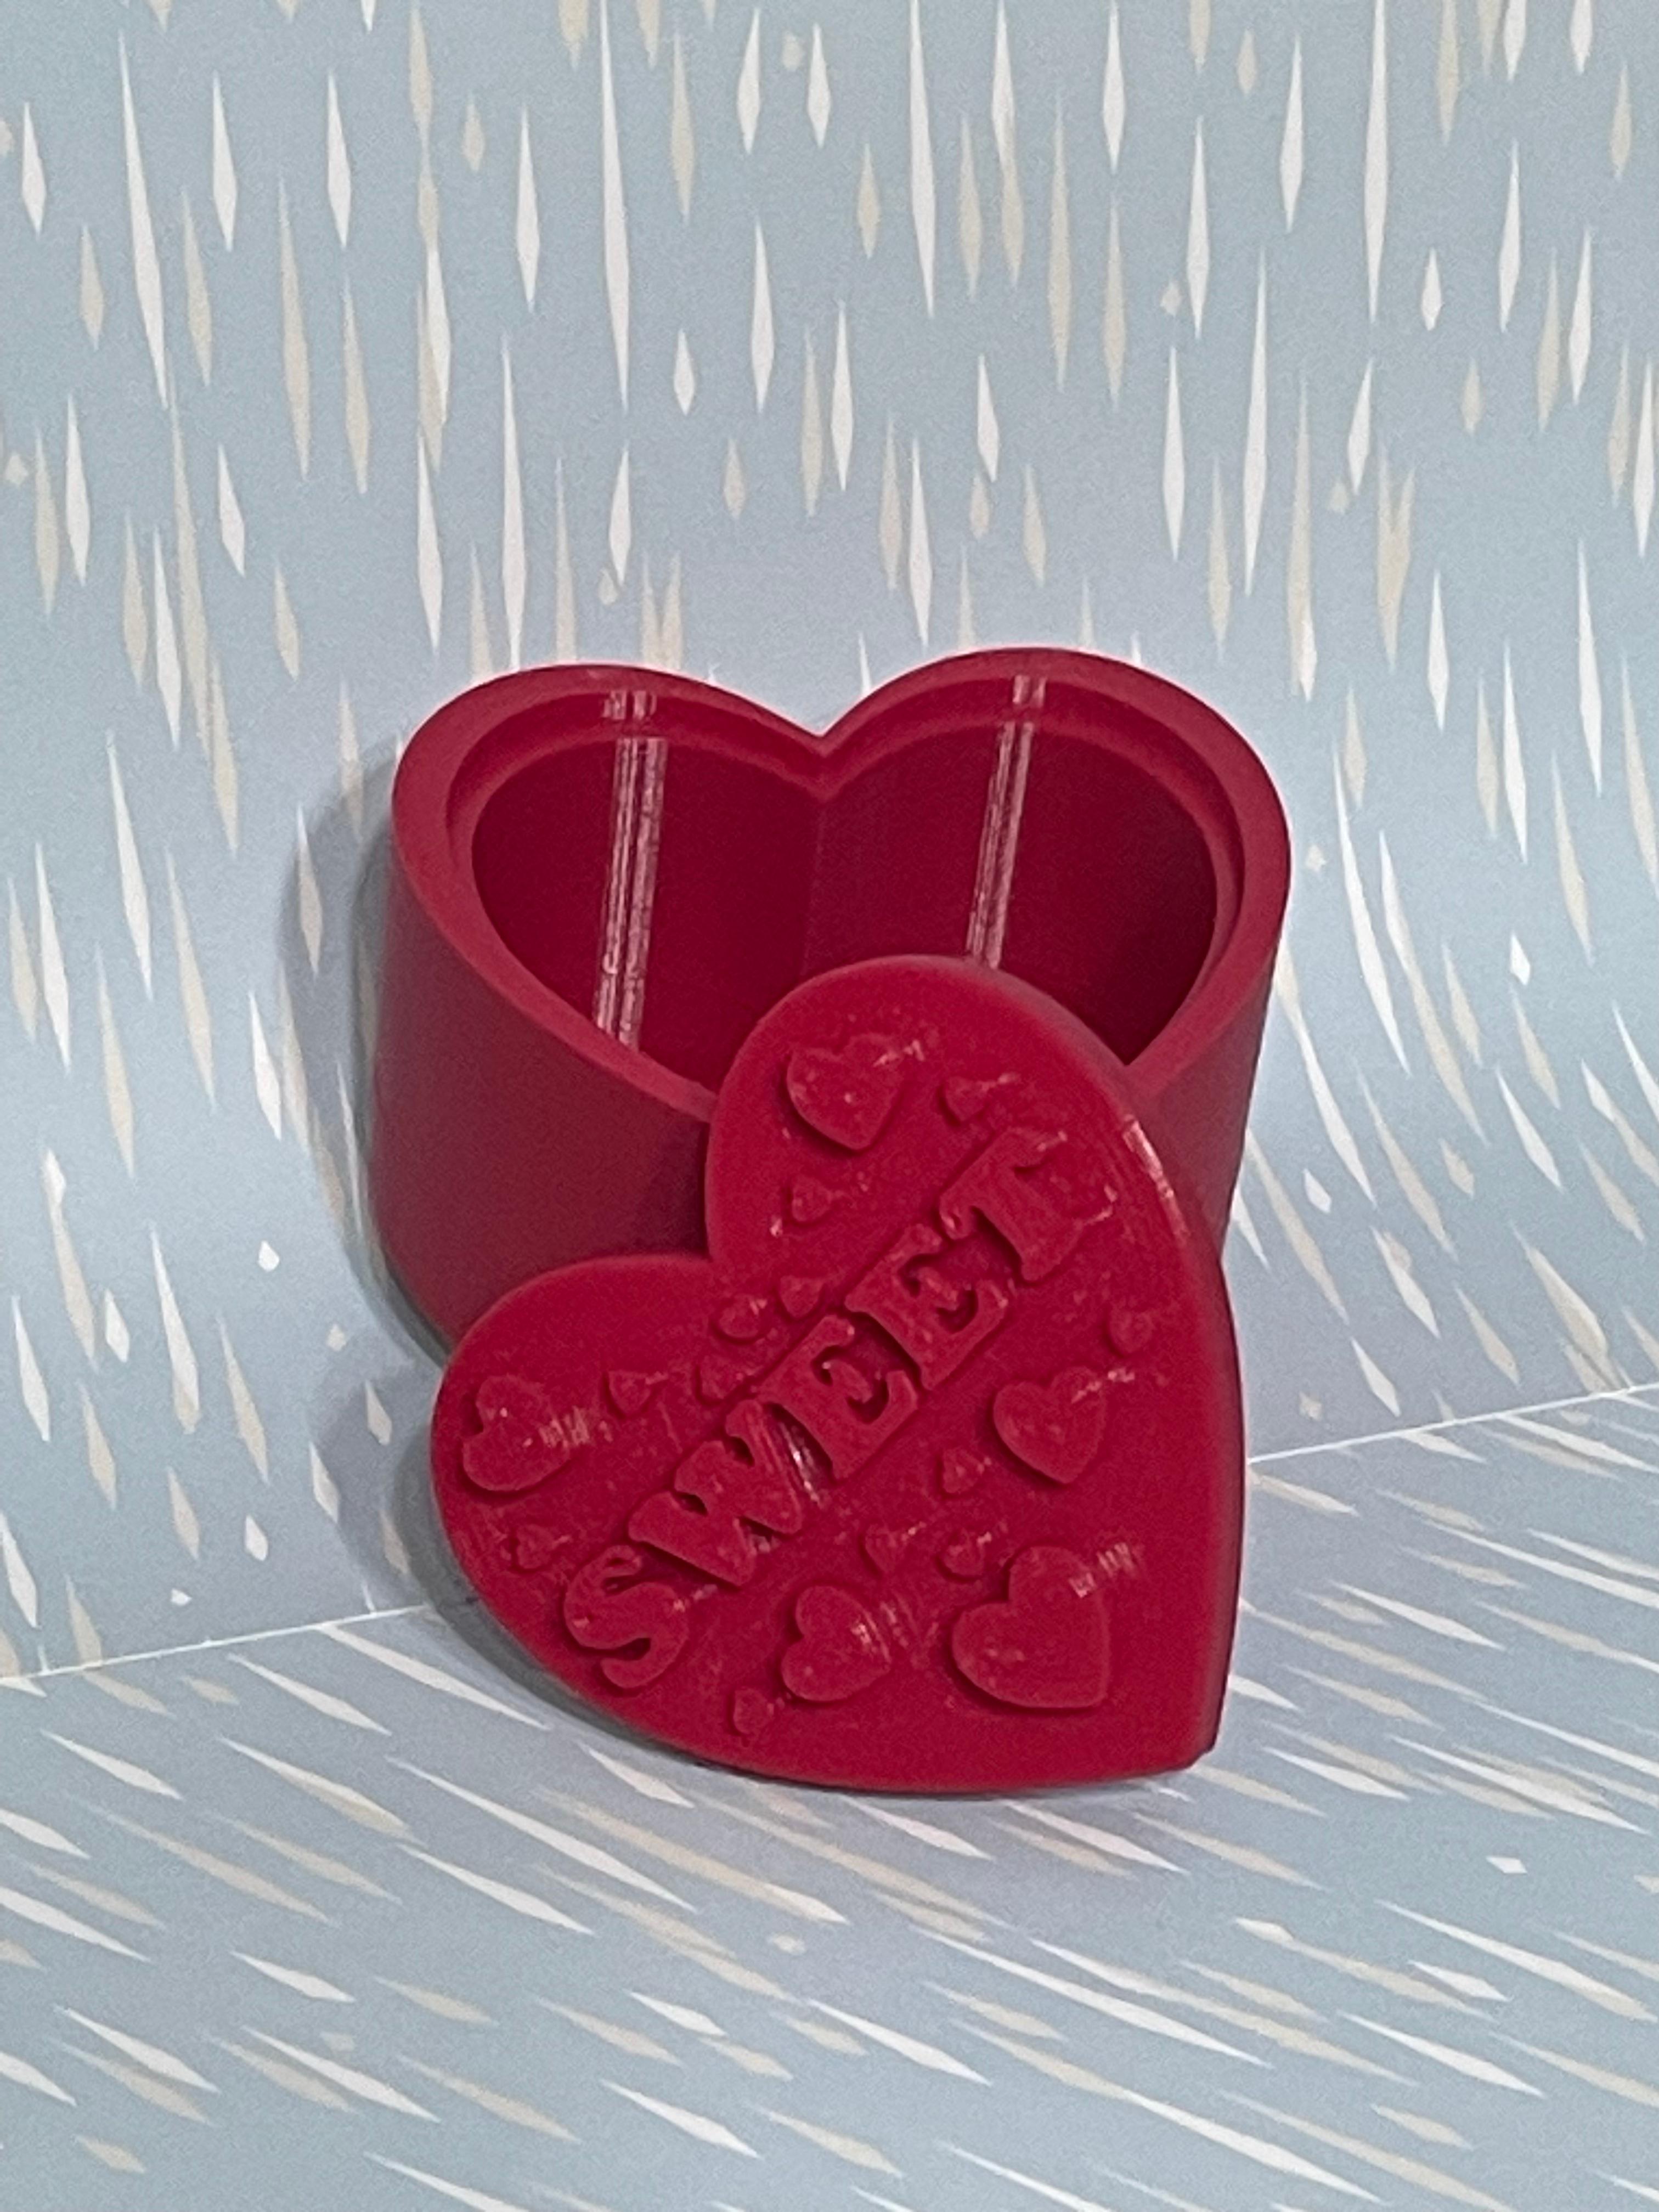 Mimic Remix of Simple Heart Box with Lid - Haven't painted mine yet - but love the way it is too.! - 3d model